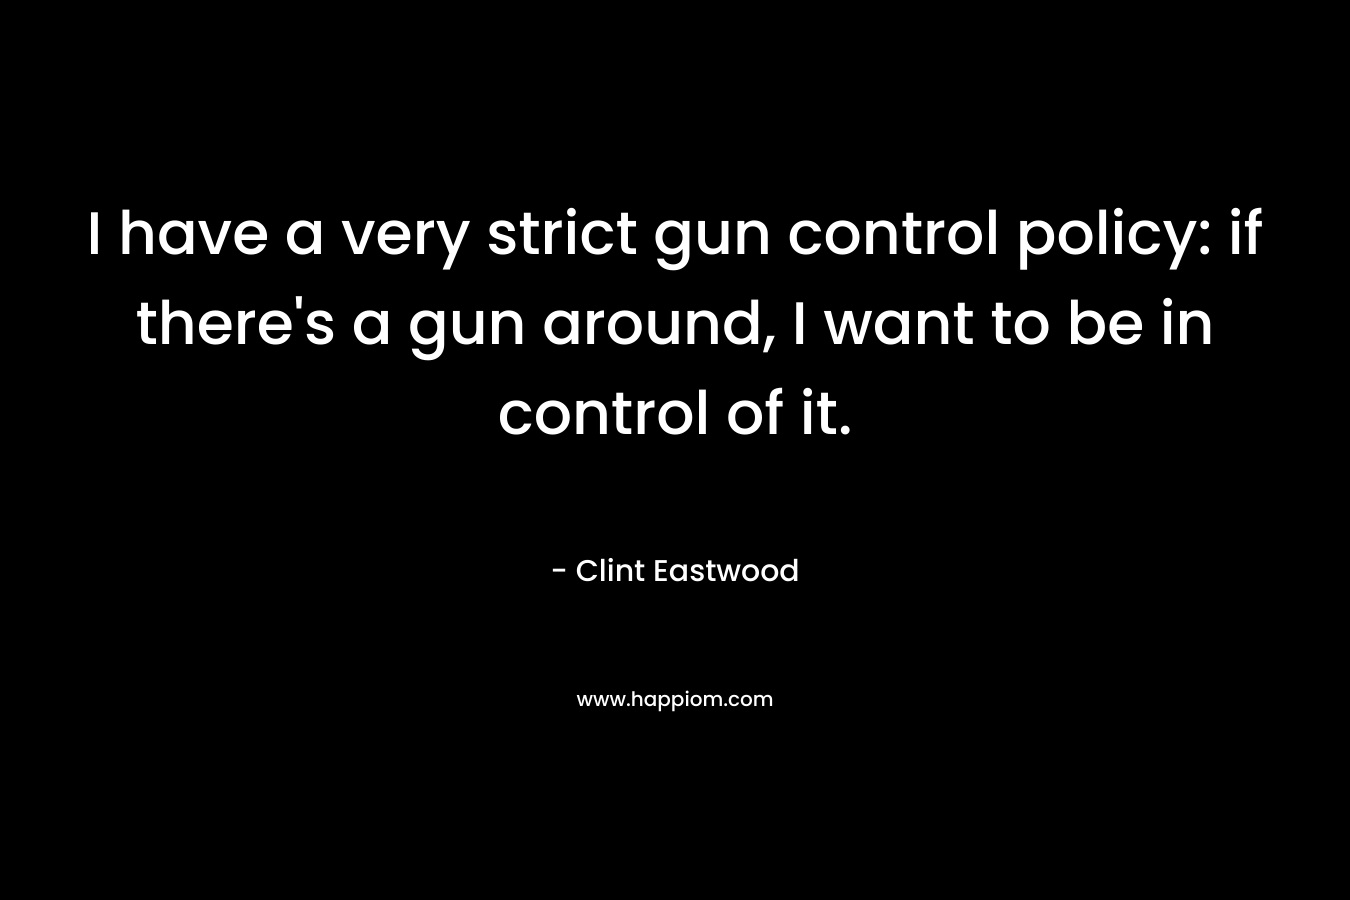 I have a very strict gun control policy: if there's a gun around, I want to be in control of it.